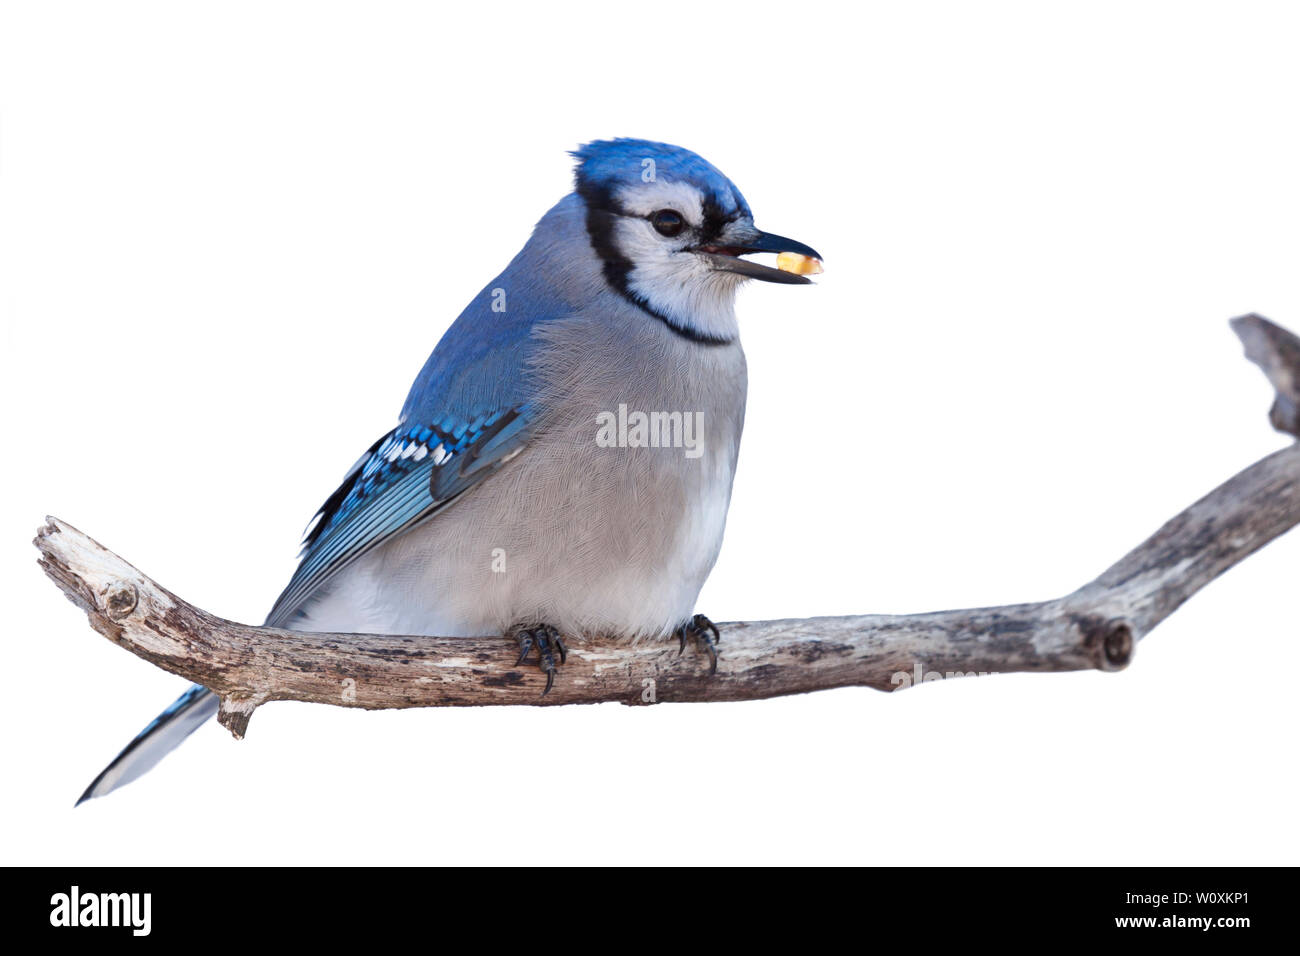 Bluejay perched on branch with a niblet of corn in its beak. White background. Stock Photo